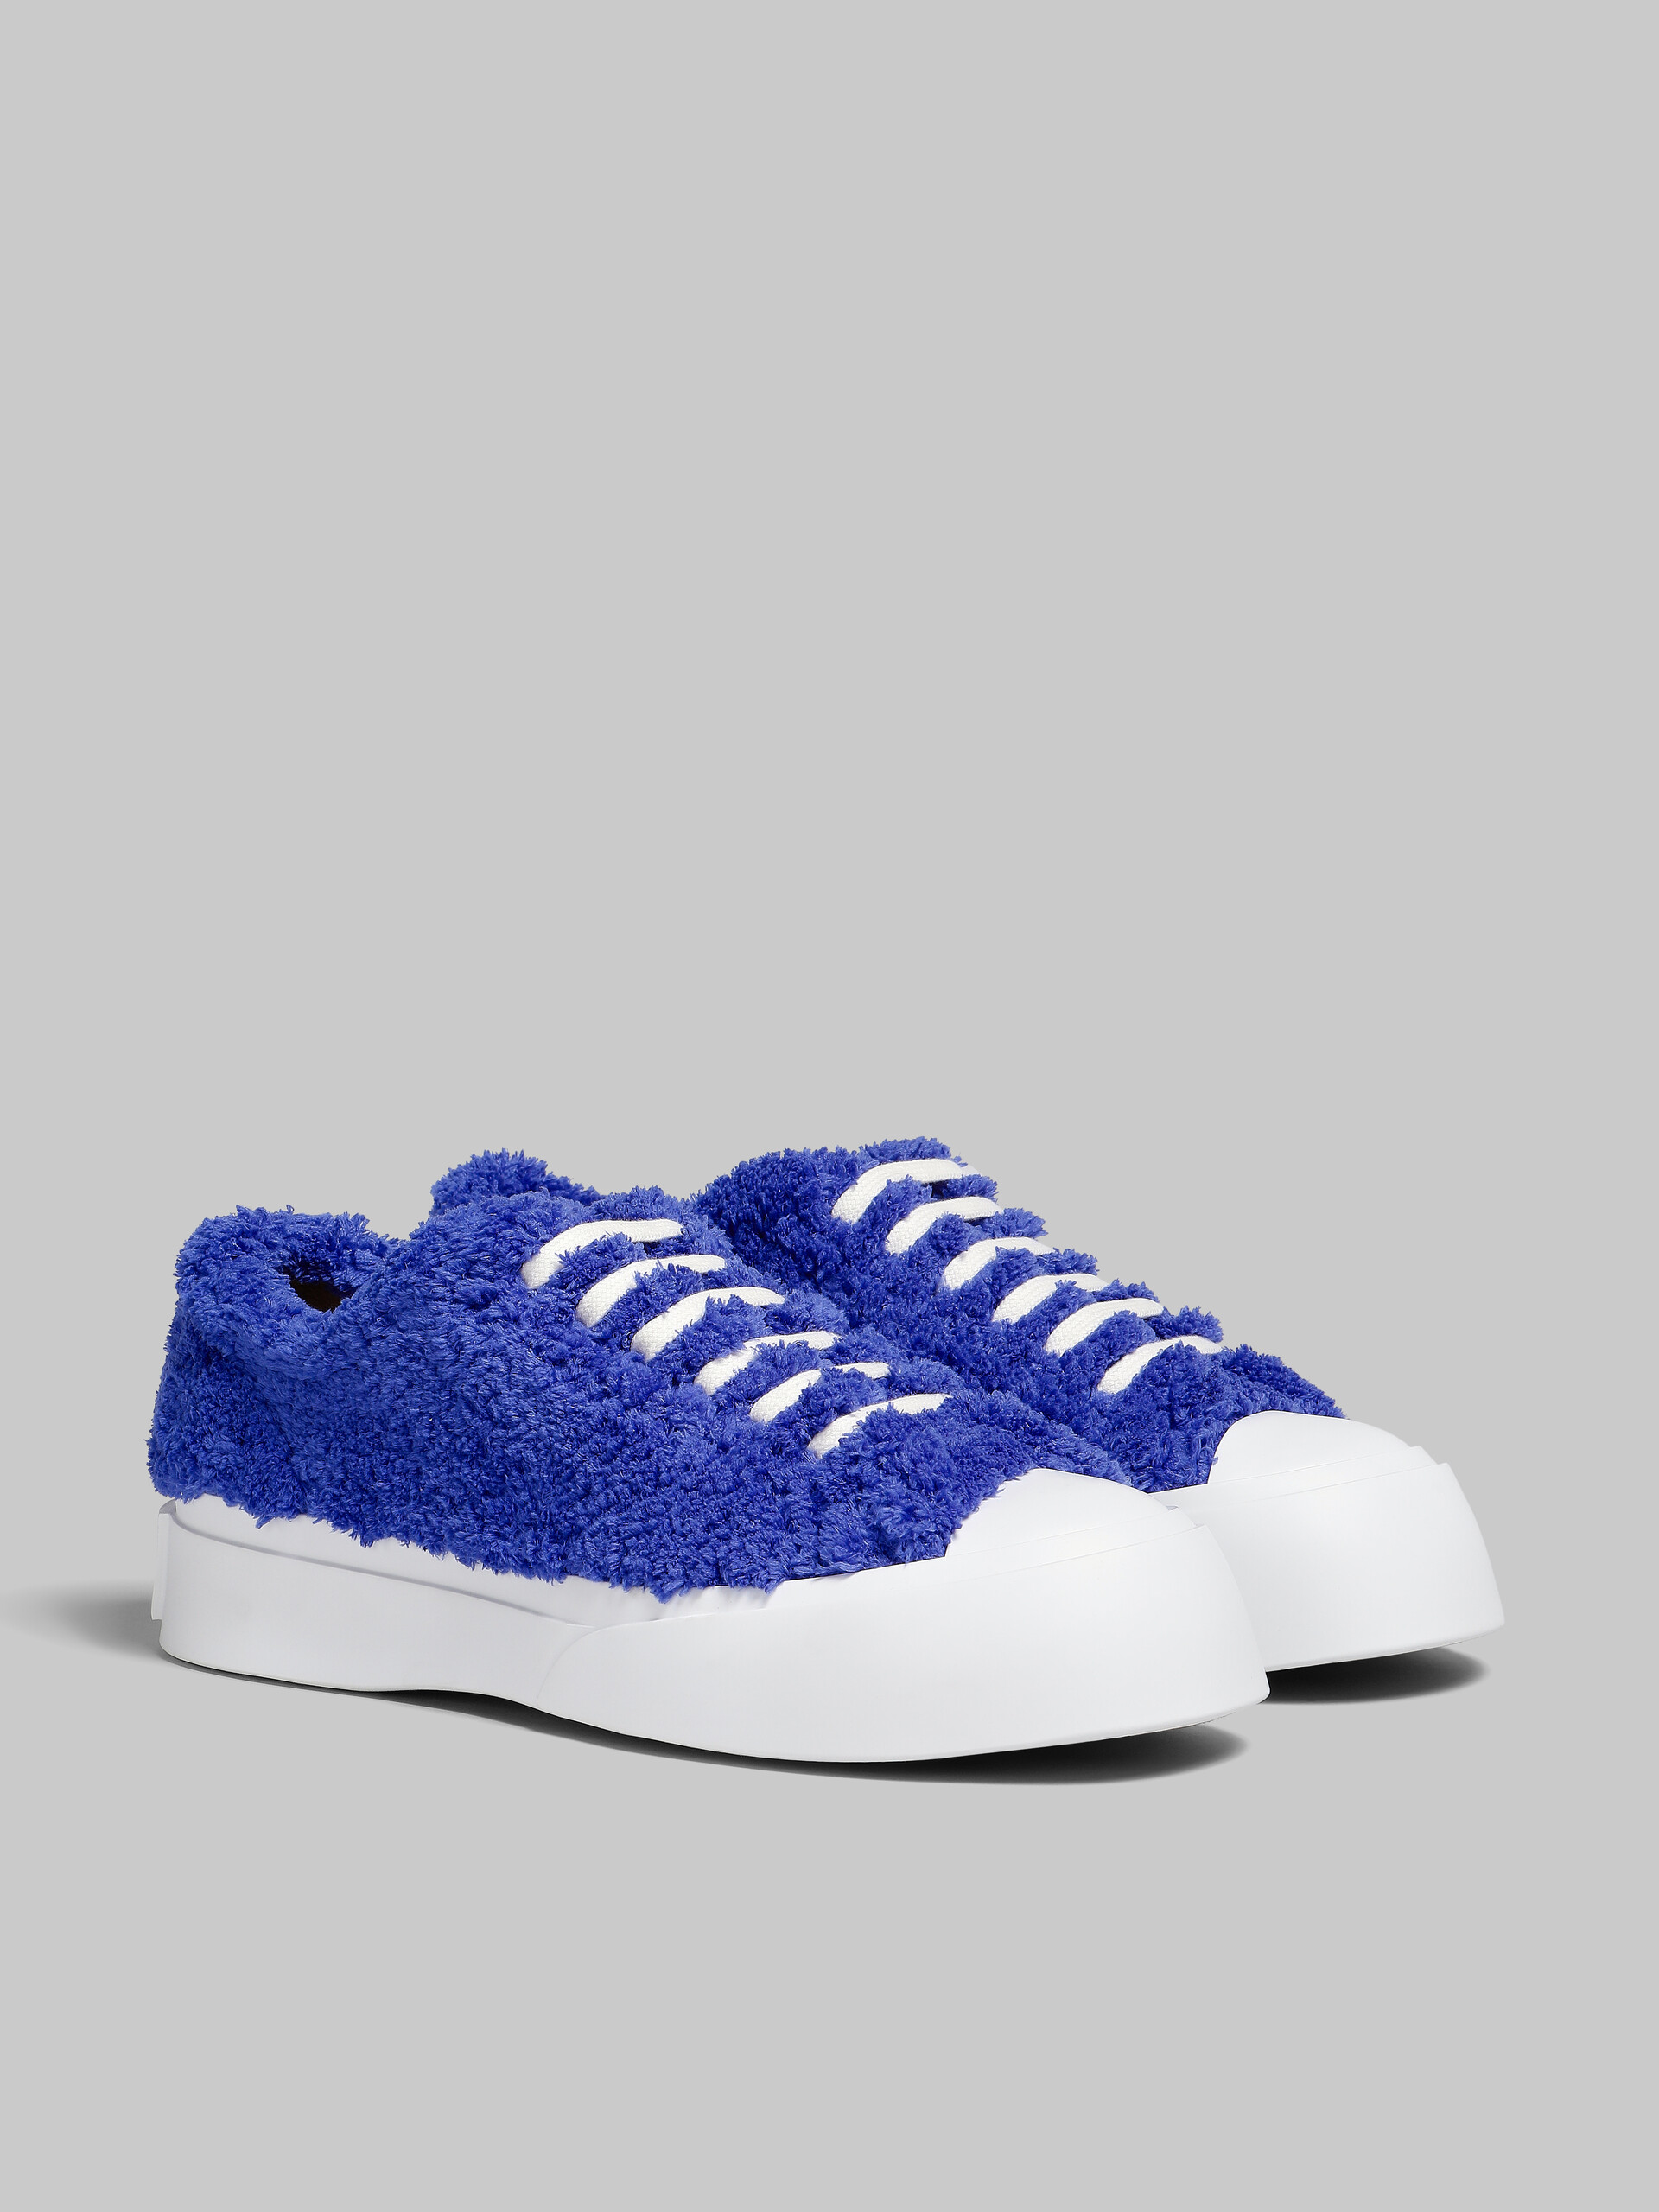 Blue Terry Pablo lace-up sneaker - Sneakers - Image 2